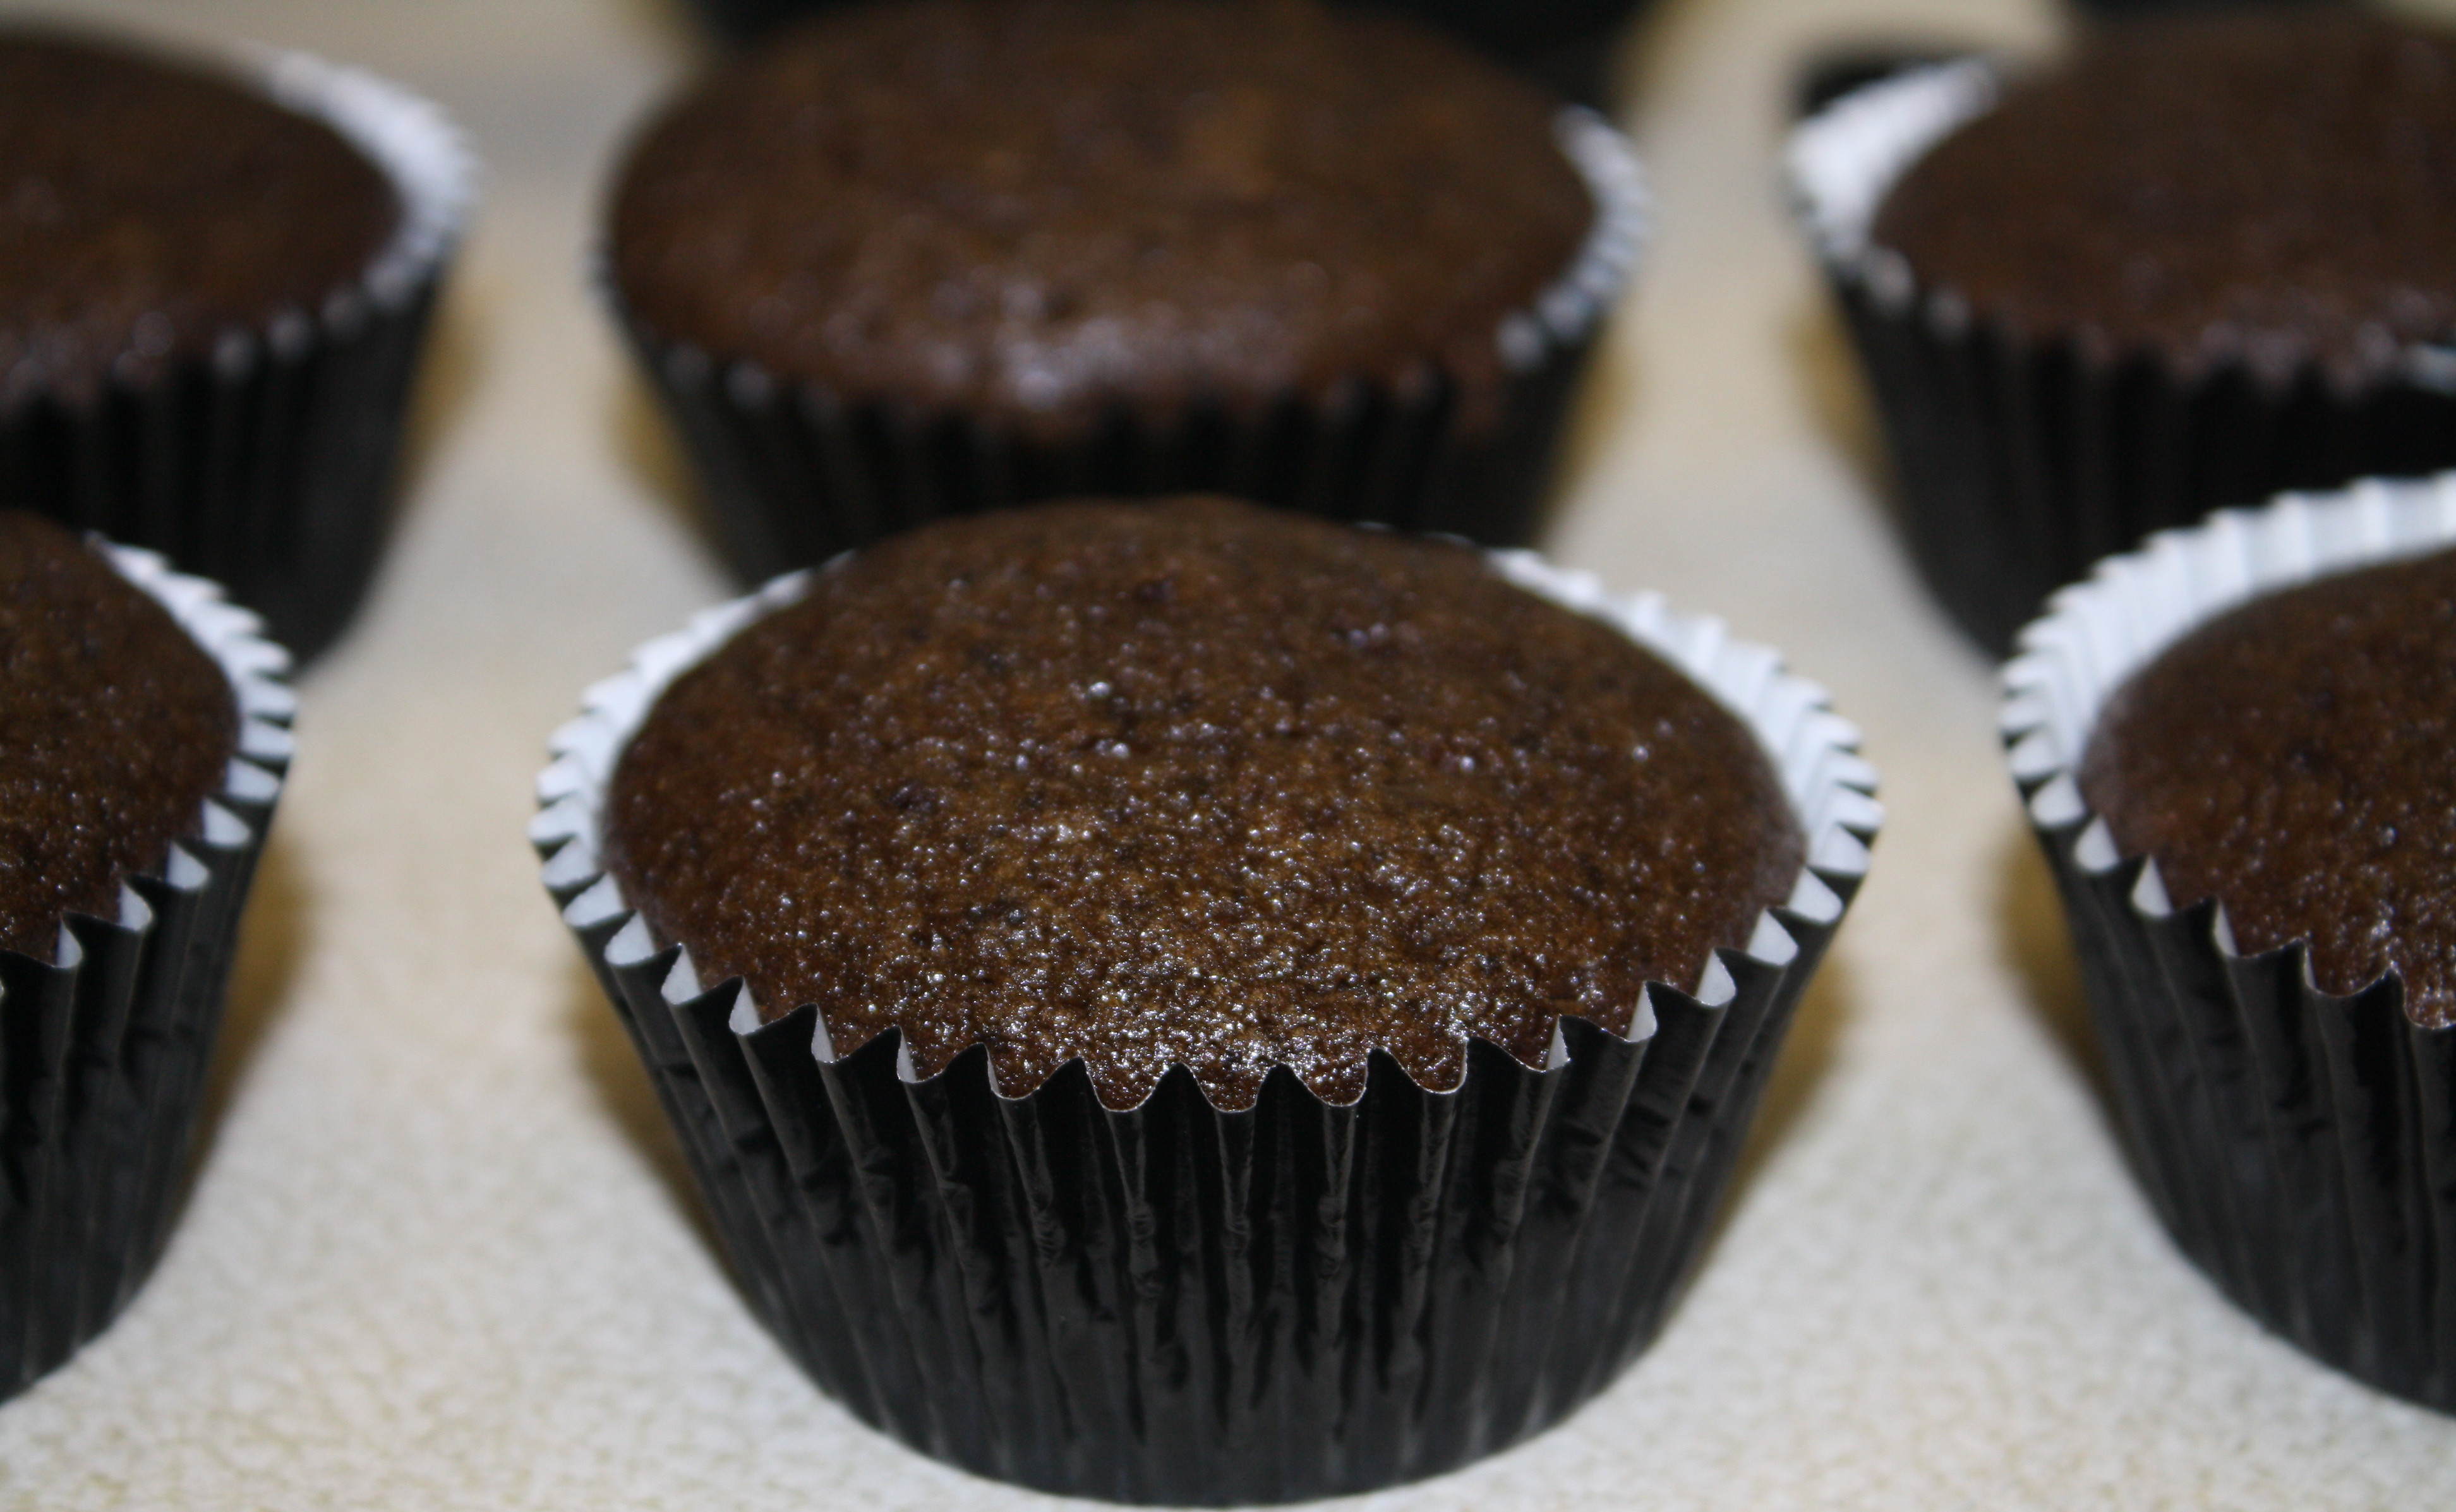 How To Make Chocolate Cupcakes Incredibly Easy & Moist Chocolate Cupcakes – The Quotable